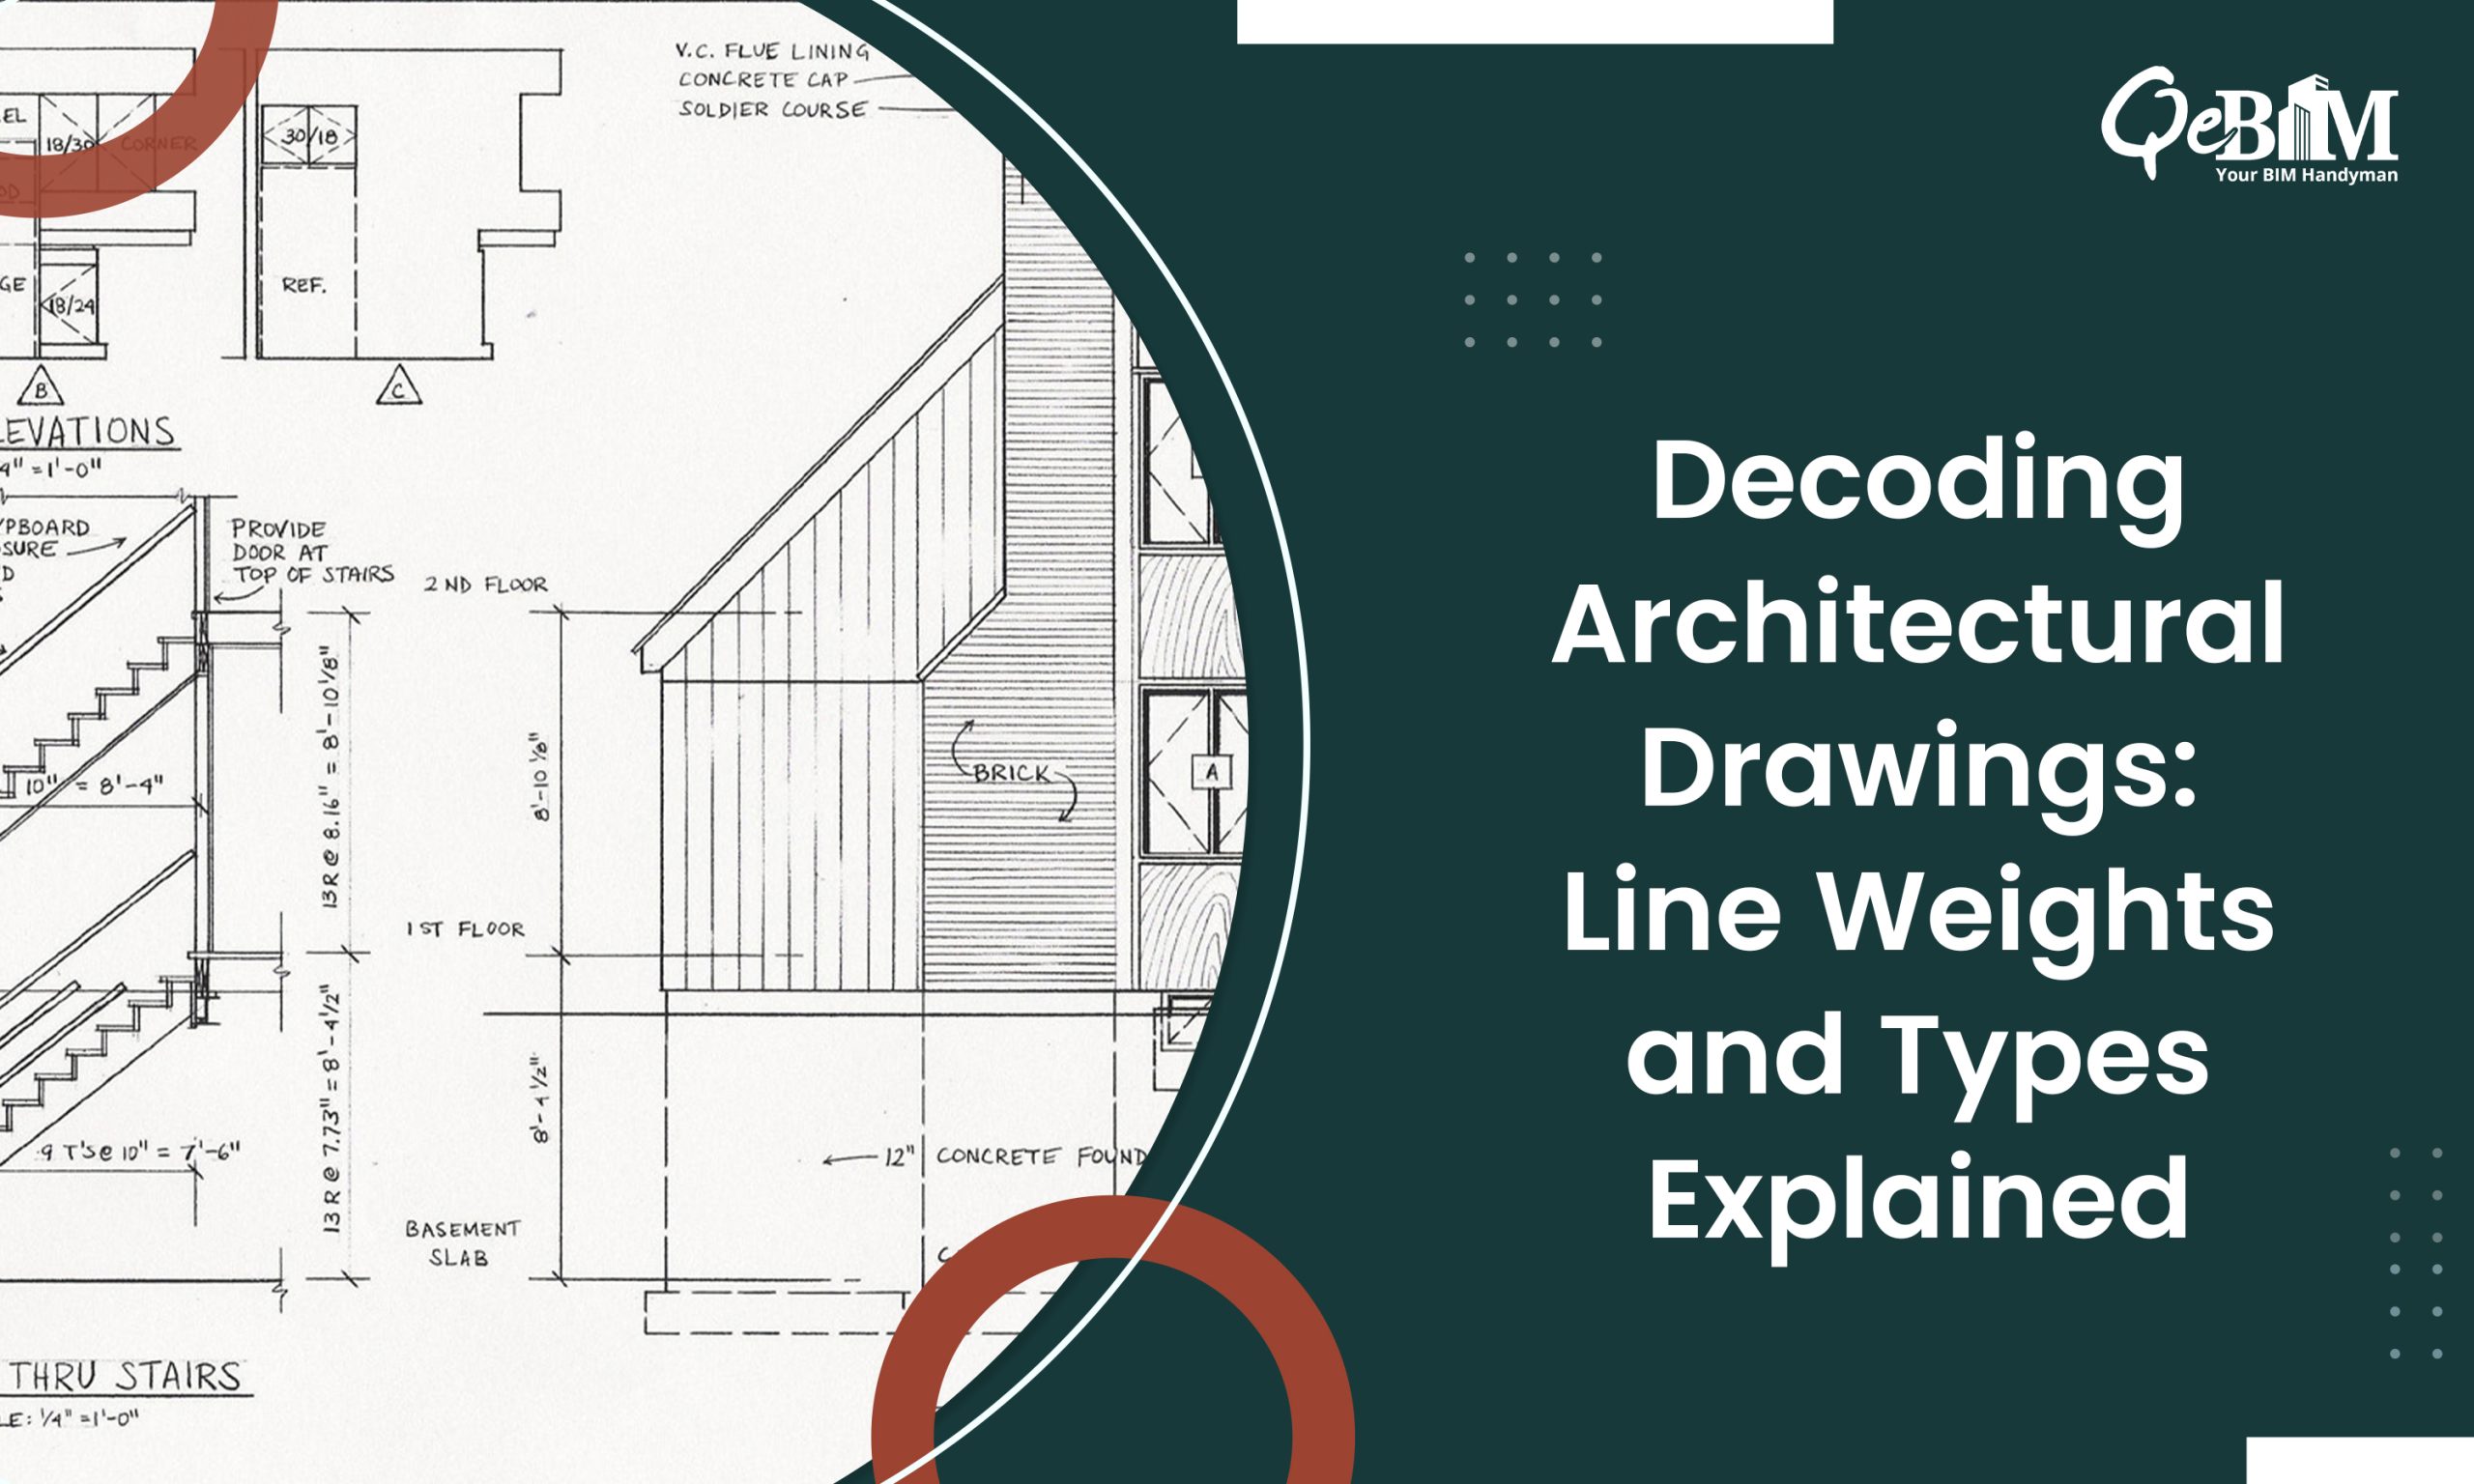 Decoding Architectural Drawings: Line Weights and Types Explained